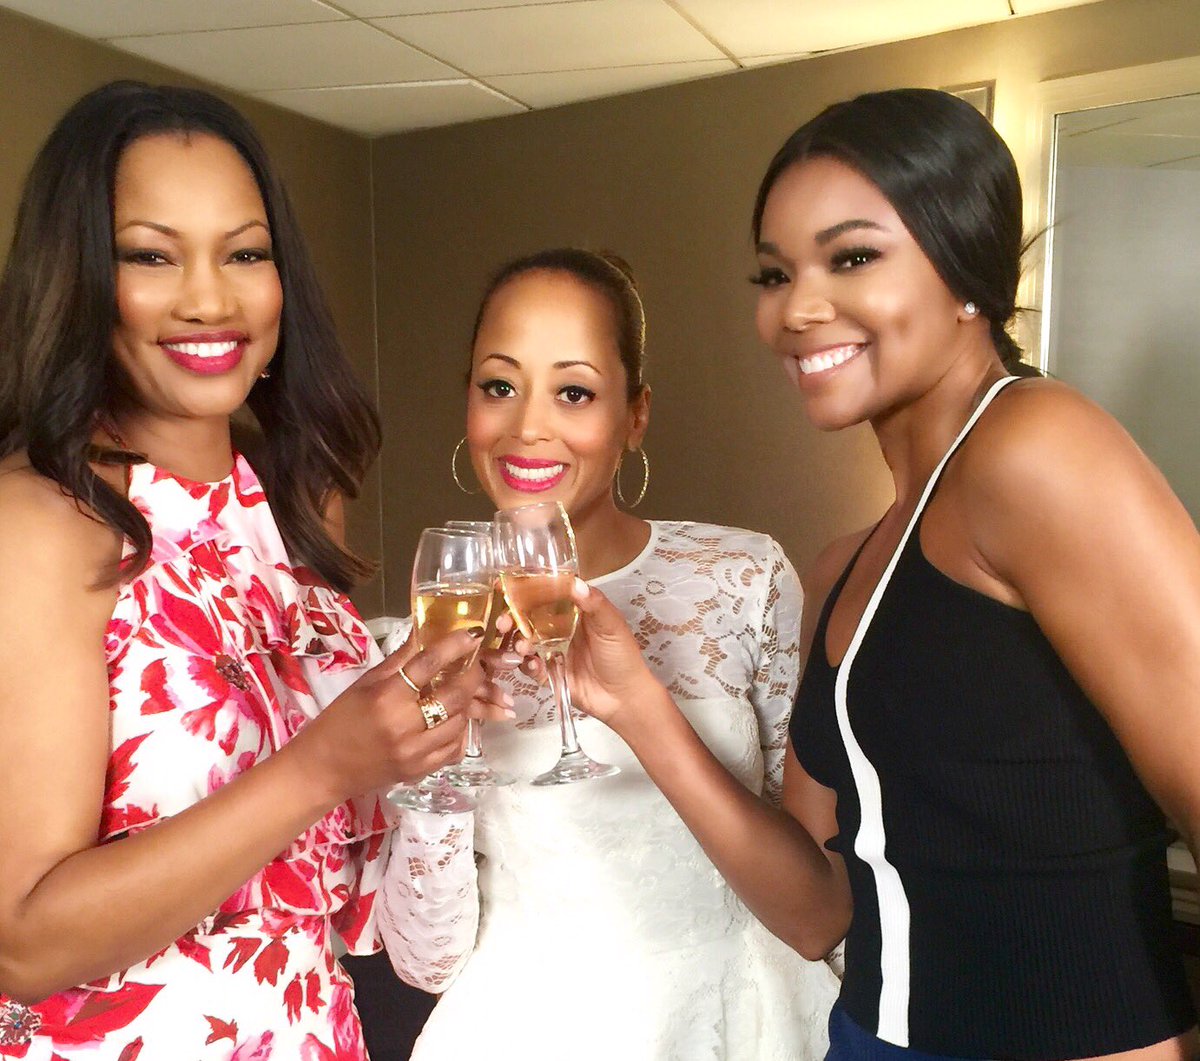 RT @GarcelleB: Tune in today to @OfficialHTL and see fun clips from @suwn luncheon honoring @itsgabrielleu @essencesays ❤️❤️ https://t.co/H…